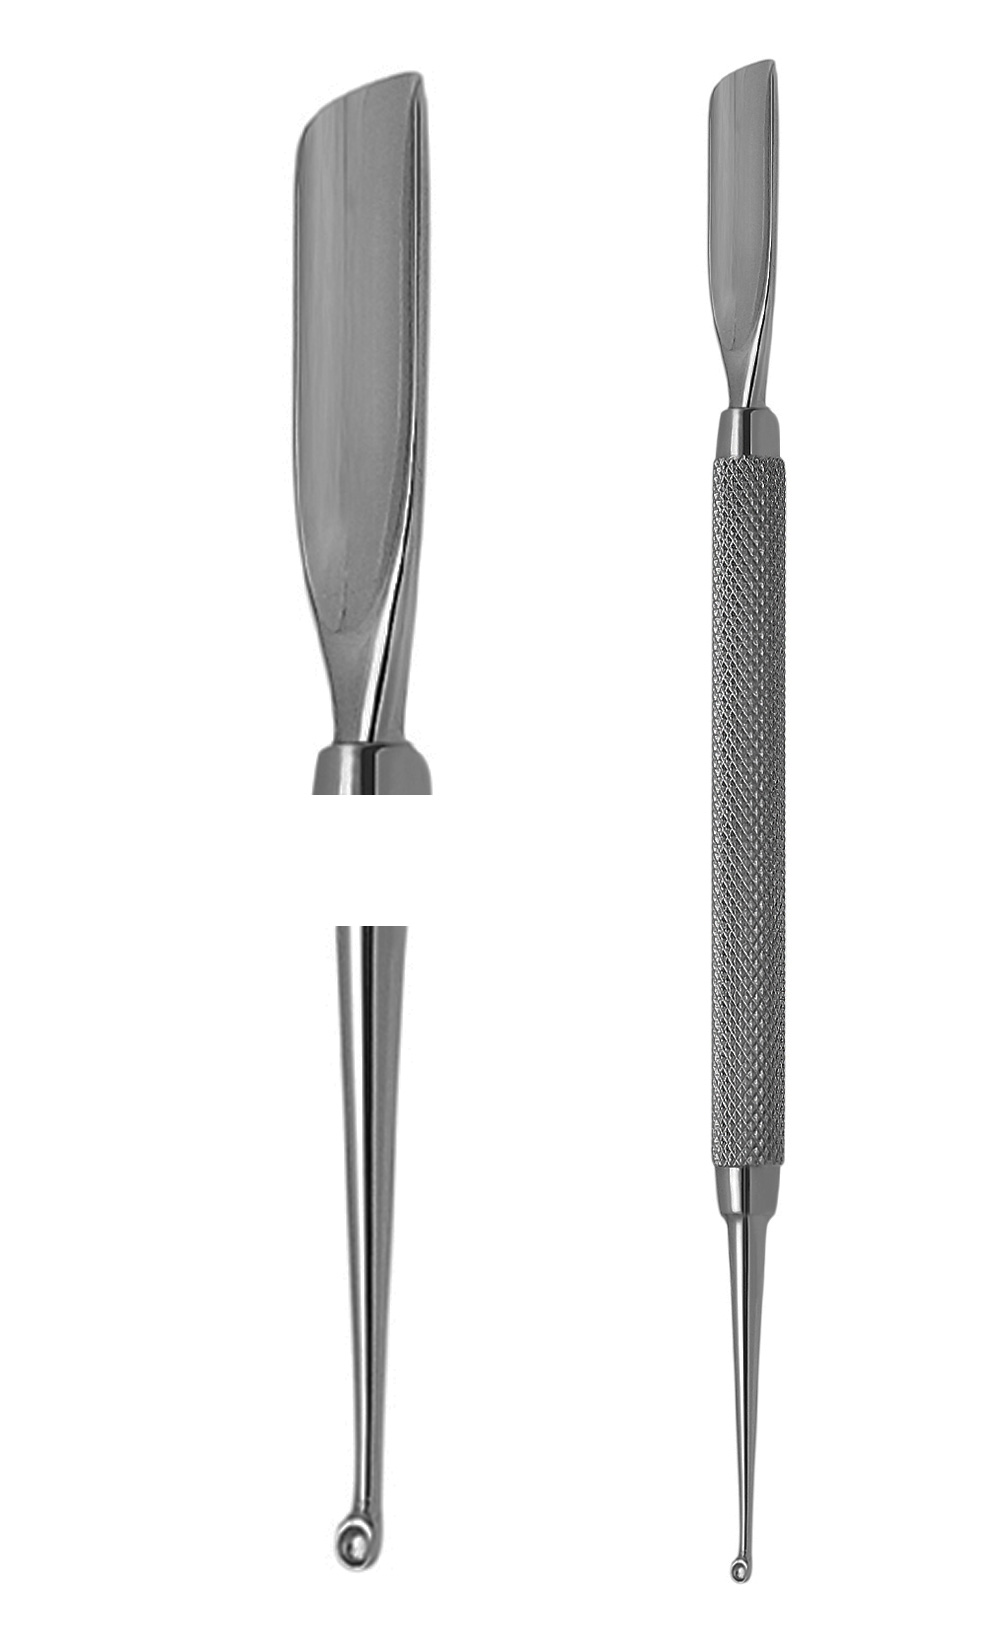 Excellent cuticle pusher and comedone lifter